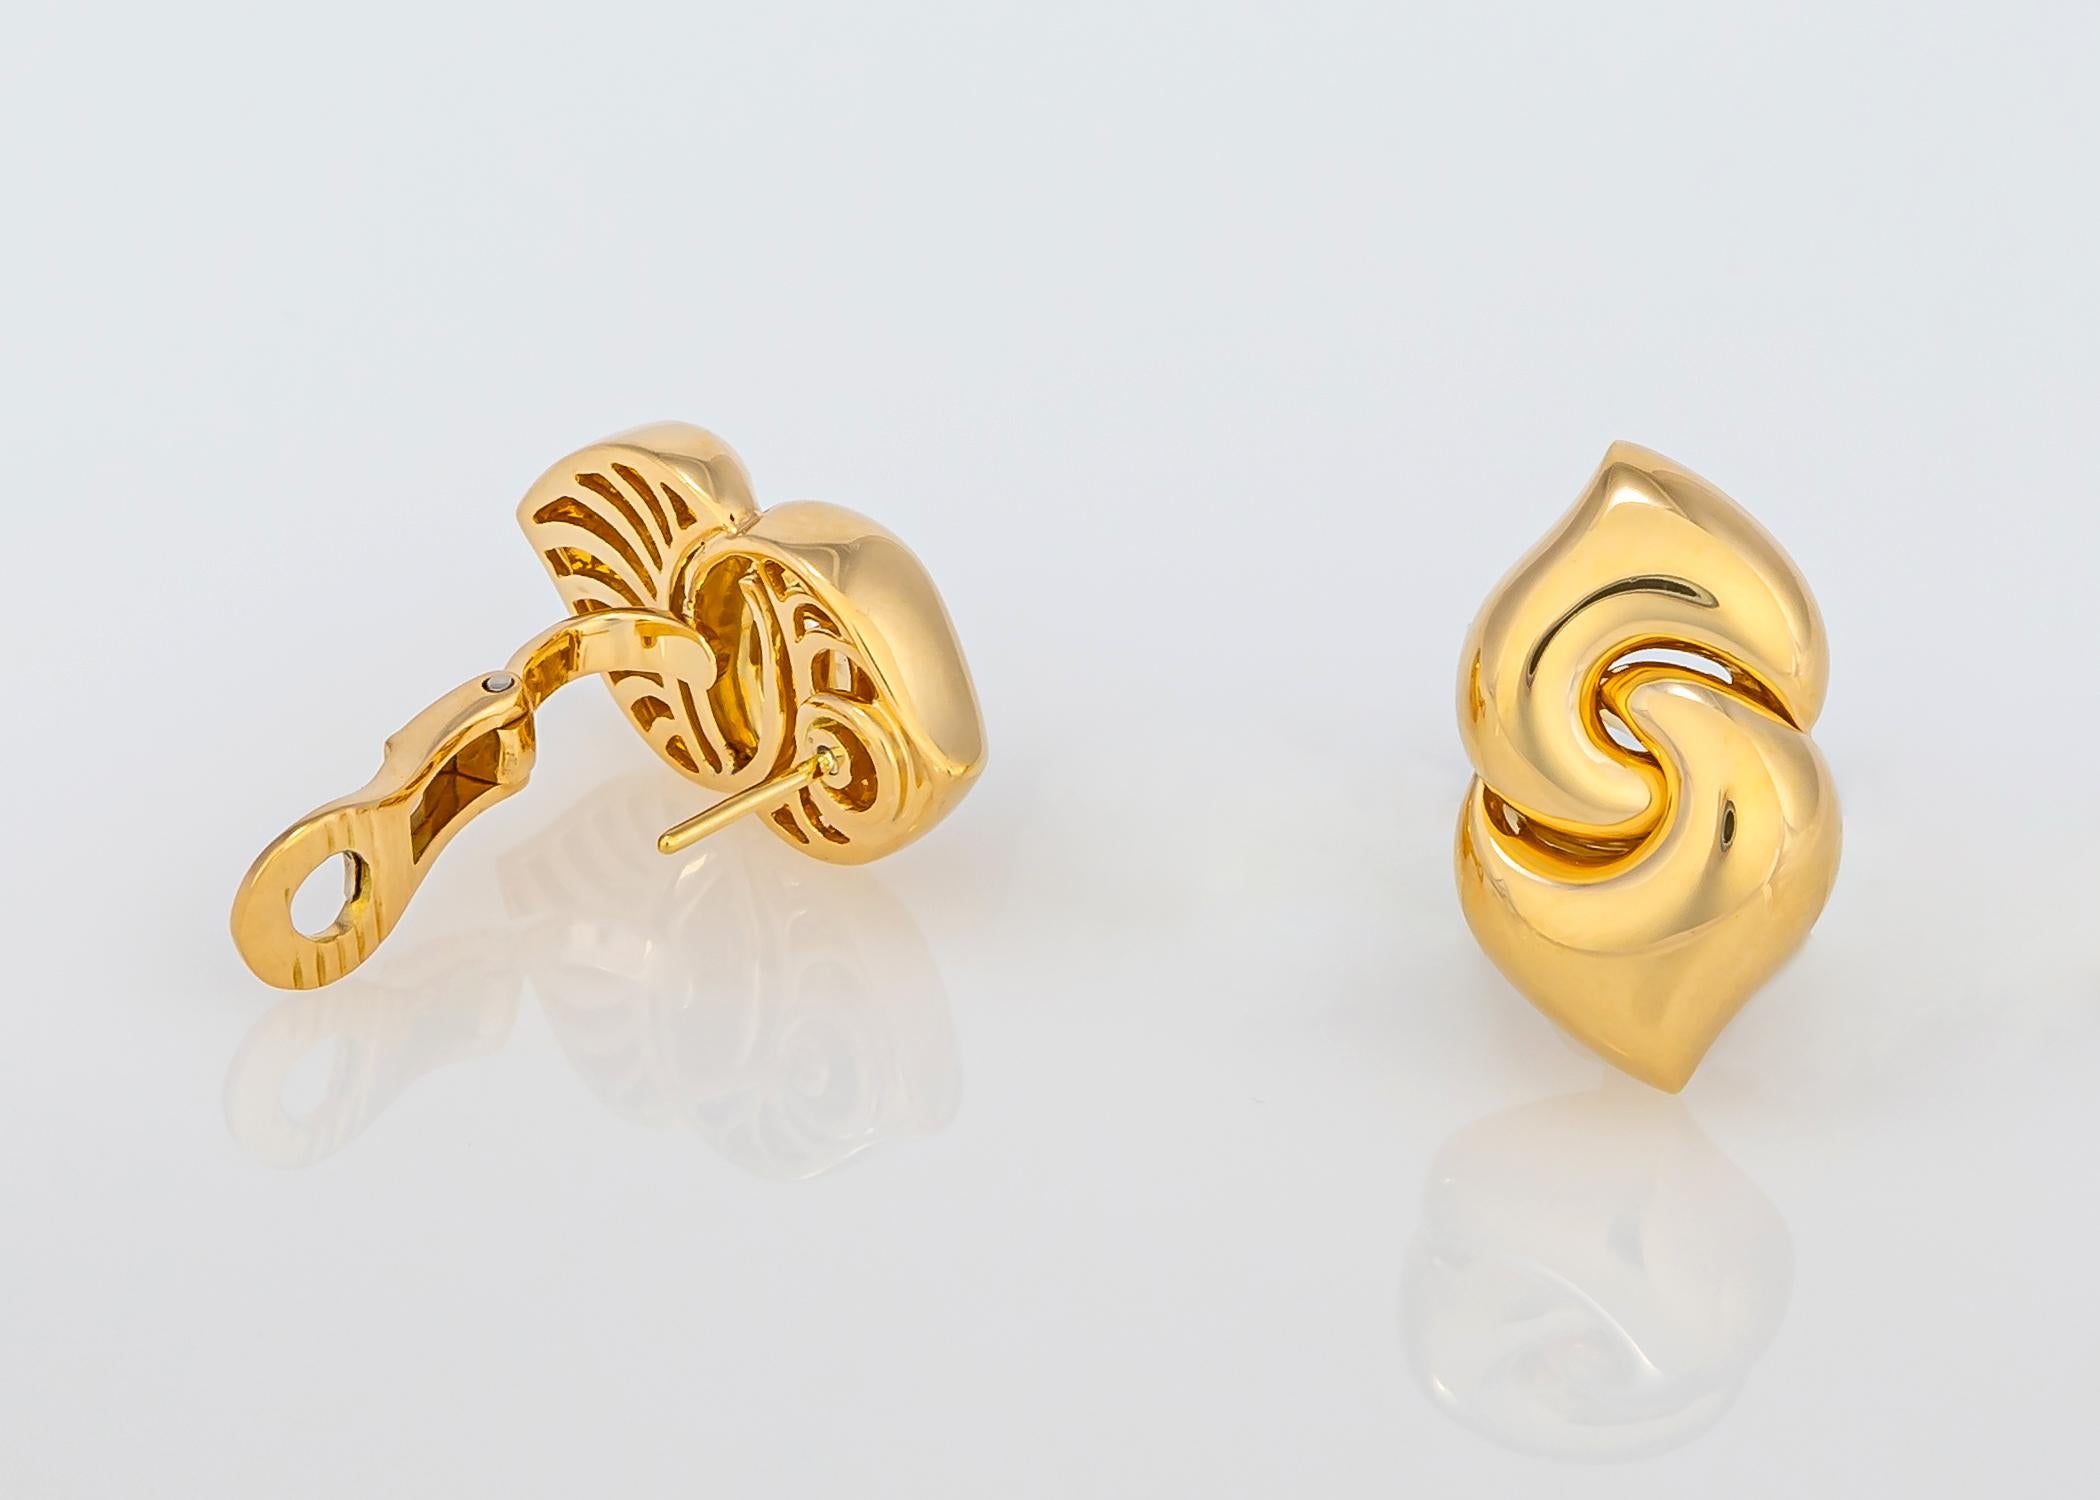 Since 1884 Bvlgari has been creating iconic designs. This is a classic collectable Bvlgari design that can be a wearable all the time earring. 1 inch in length. Italian jewelry is always a good idea. 